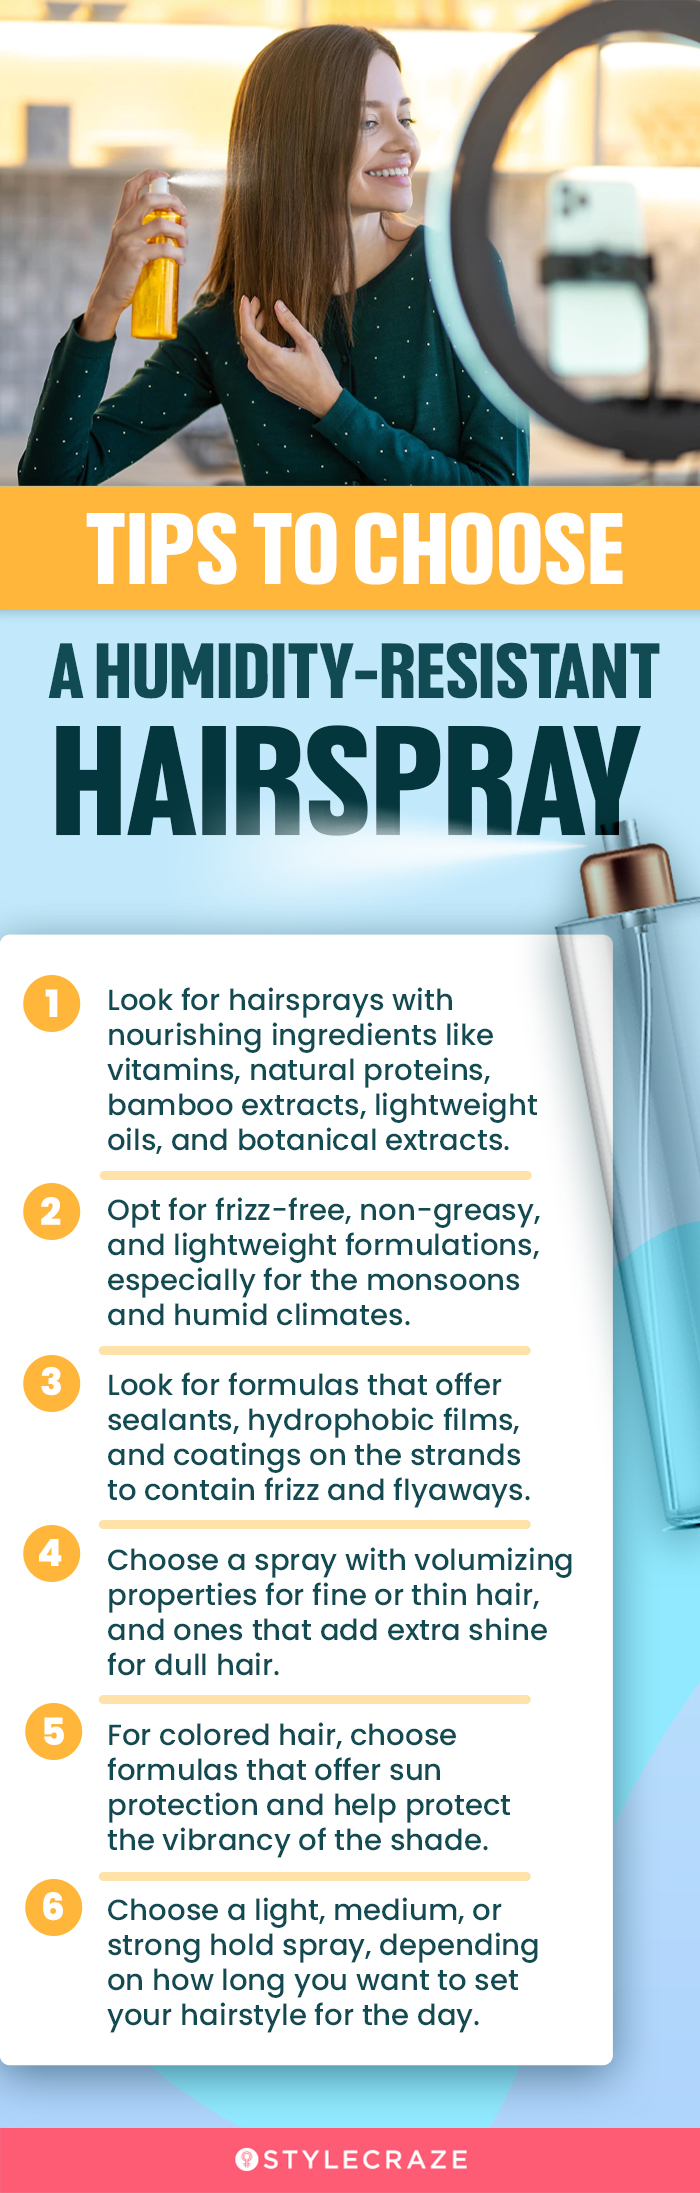 Tips To Choose A Humidity-Resistant Hairspray   [infographic]